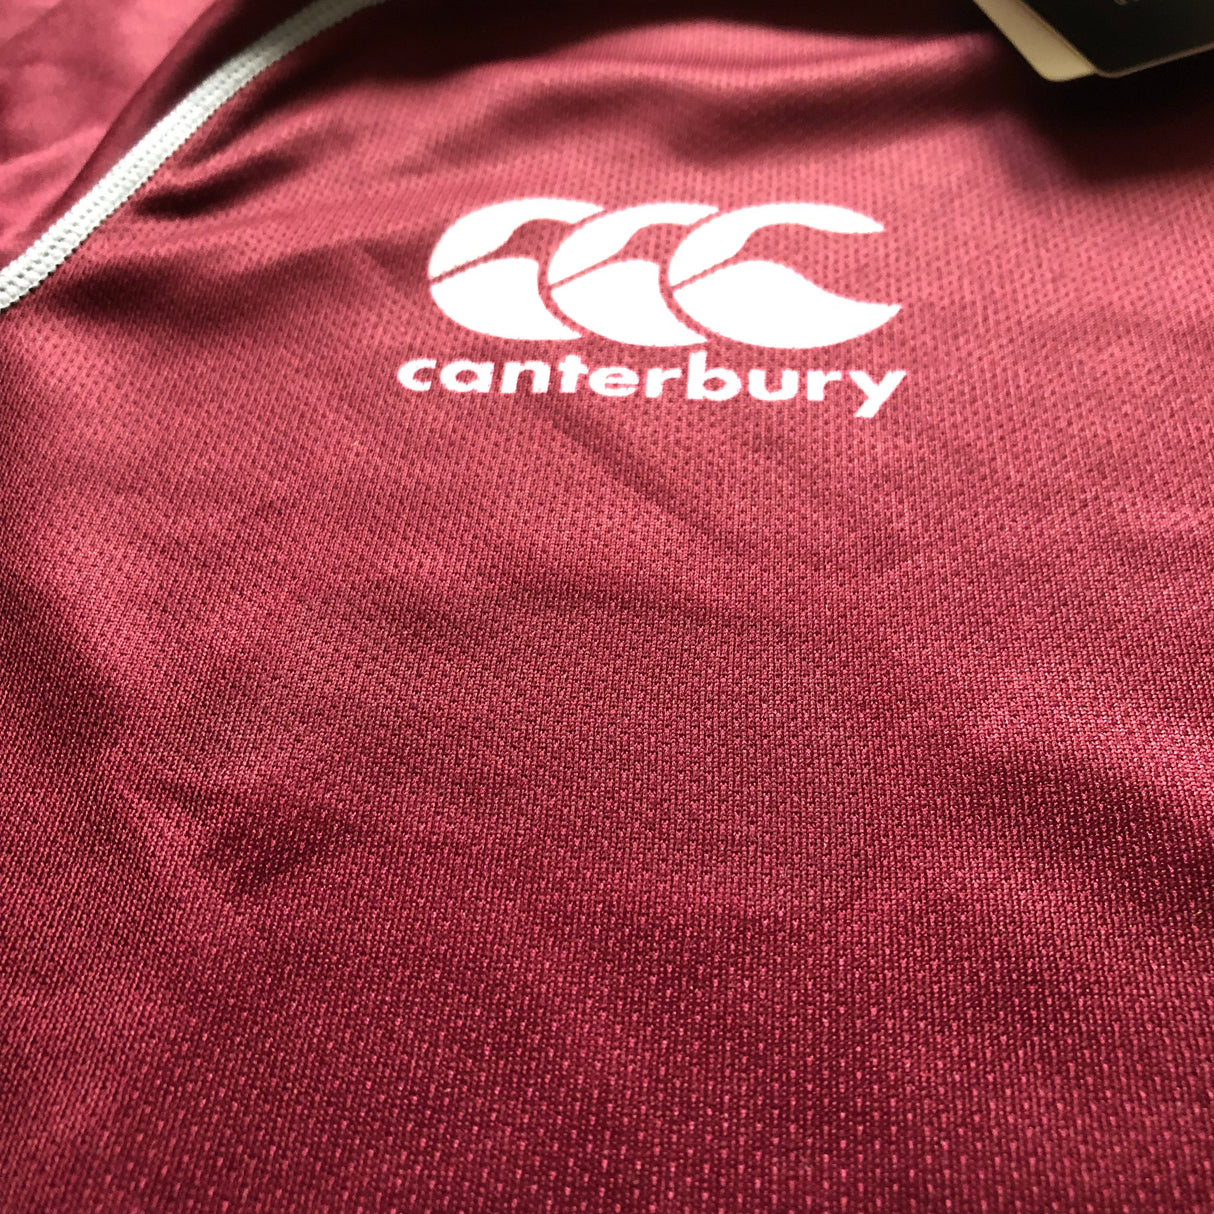 Georgia National Rugby Team Jersey 2018/19 Medium BNWT (Defect) Underdog Rugby - The Tier 2 Rugby Shop 